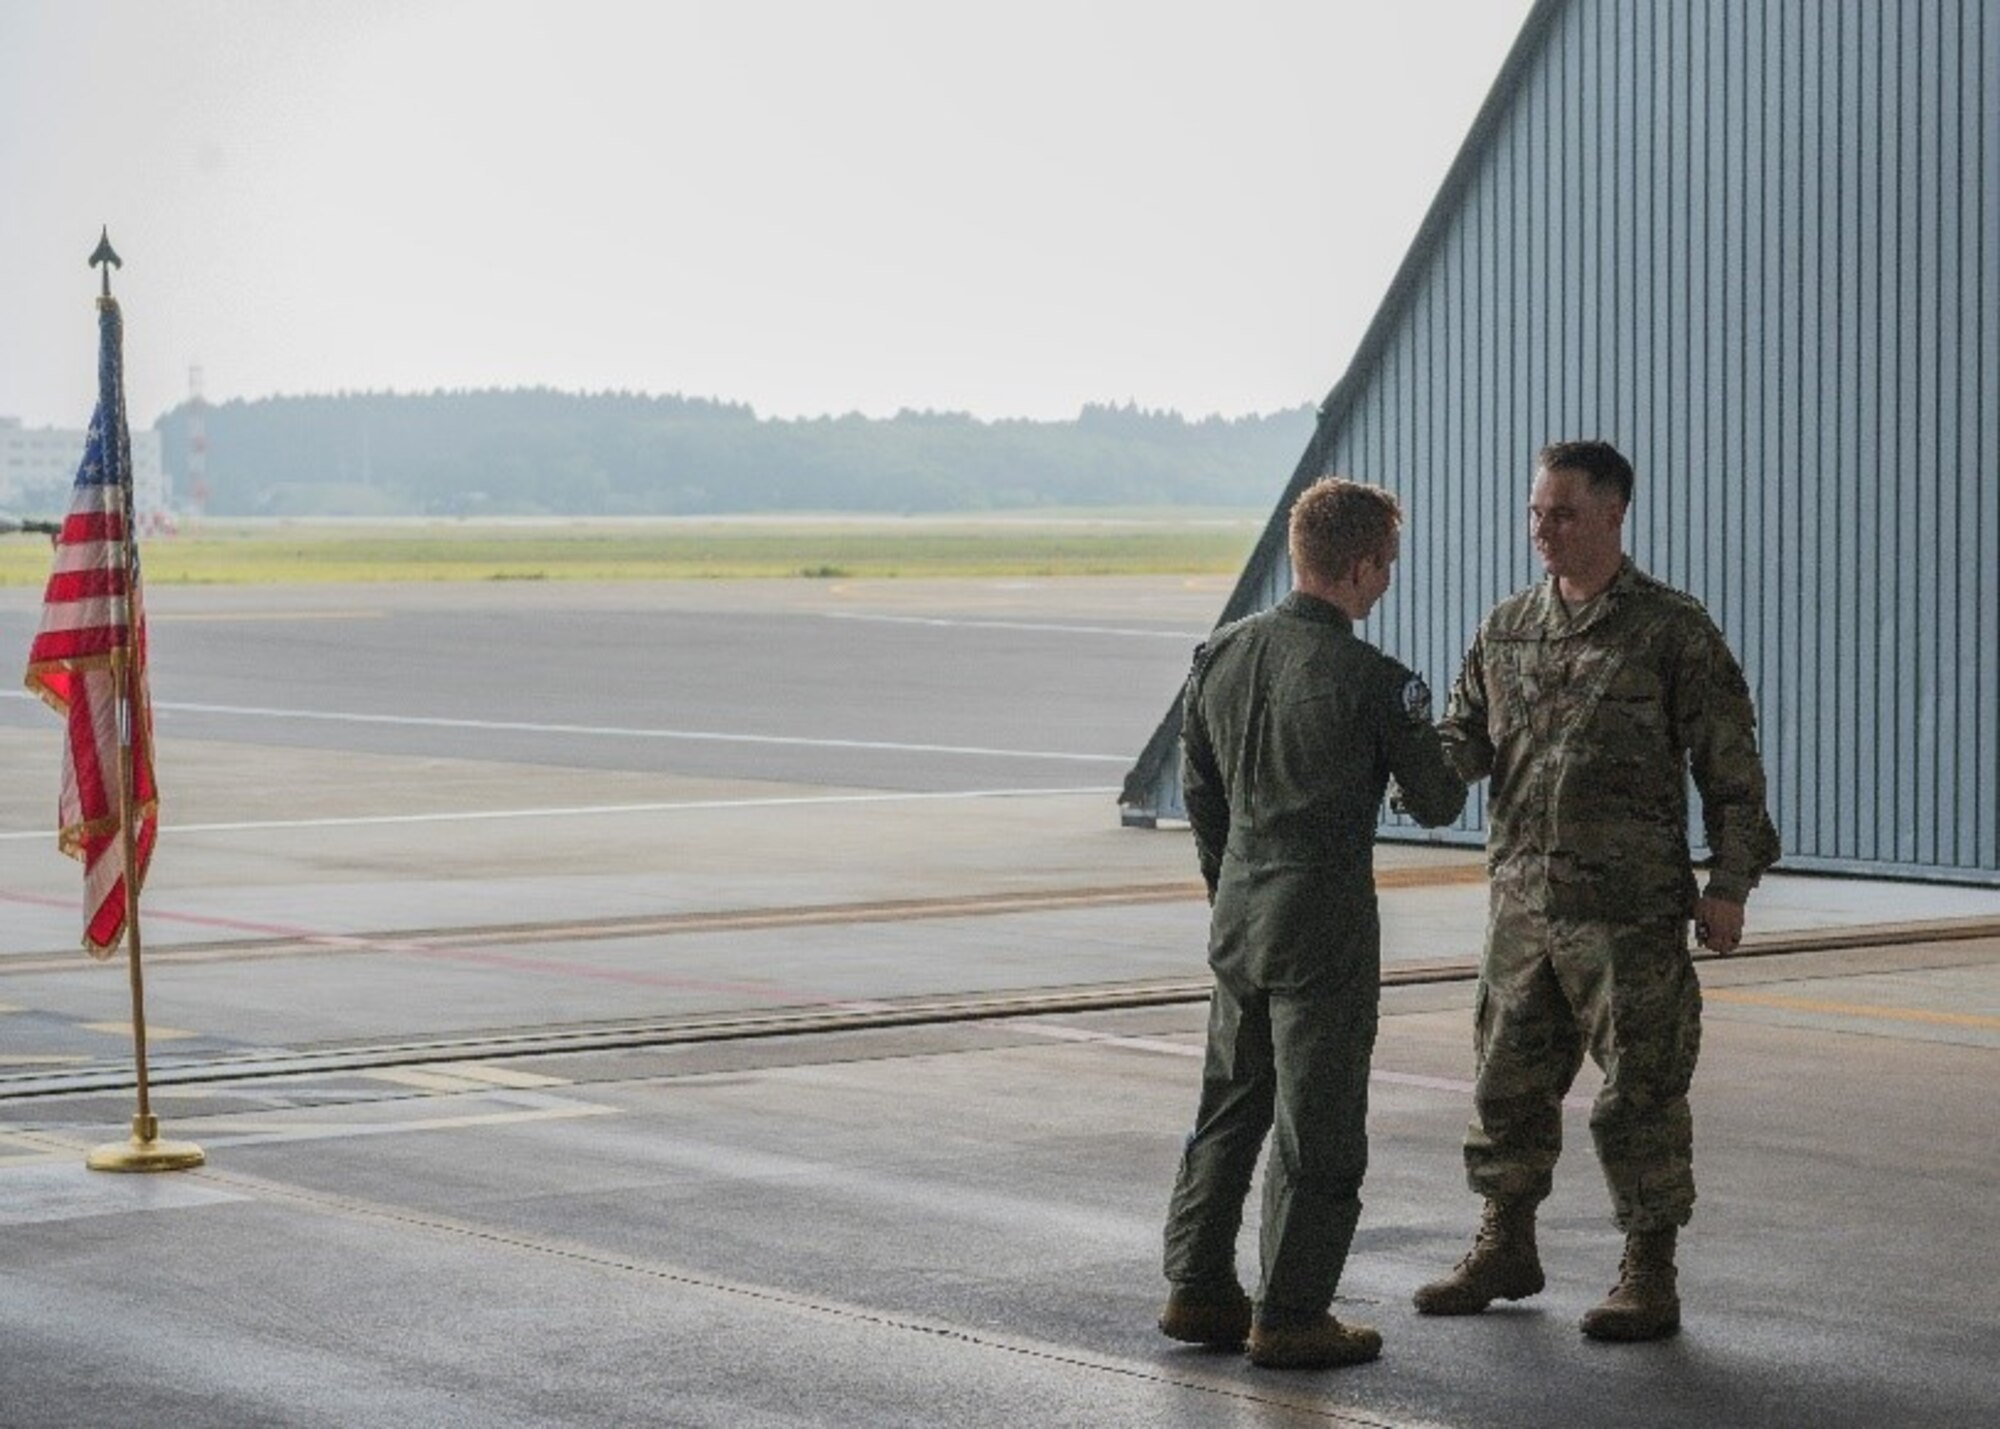 Military member gives another military member a coin and a handshake.